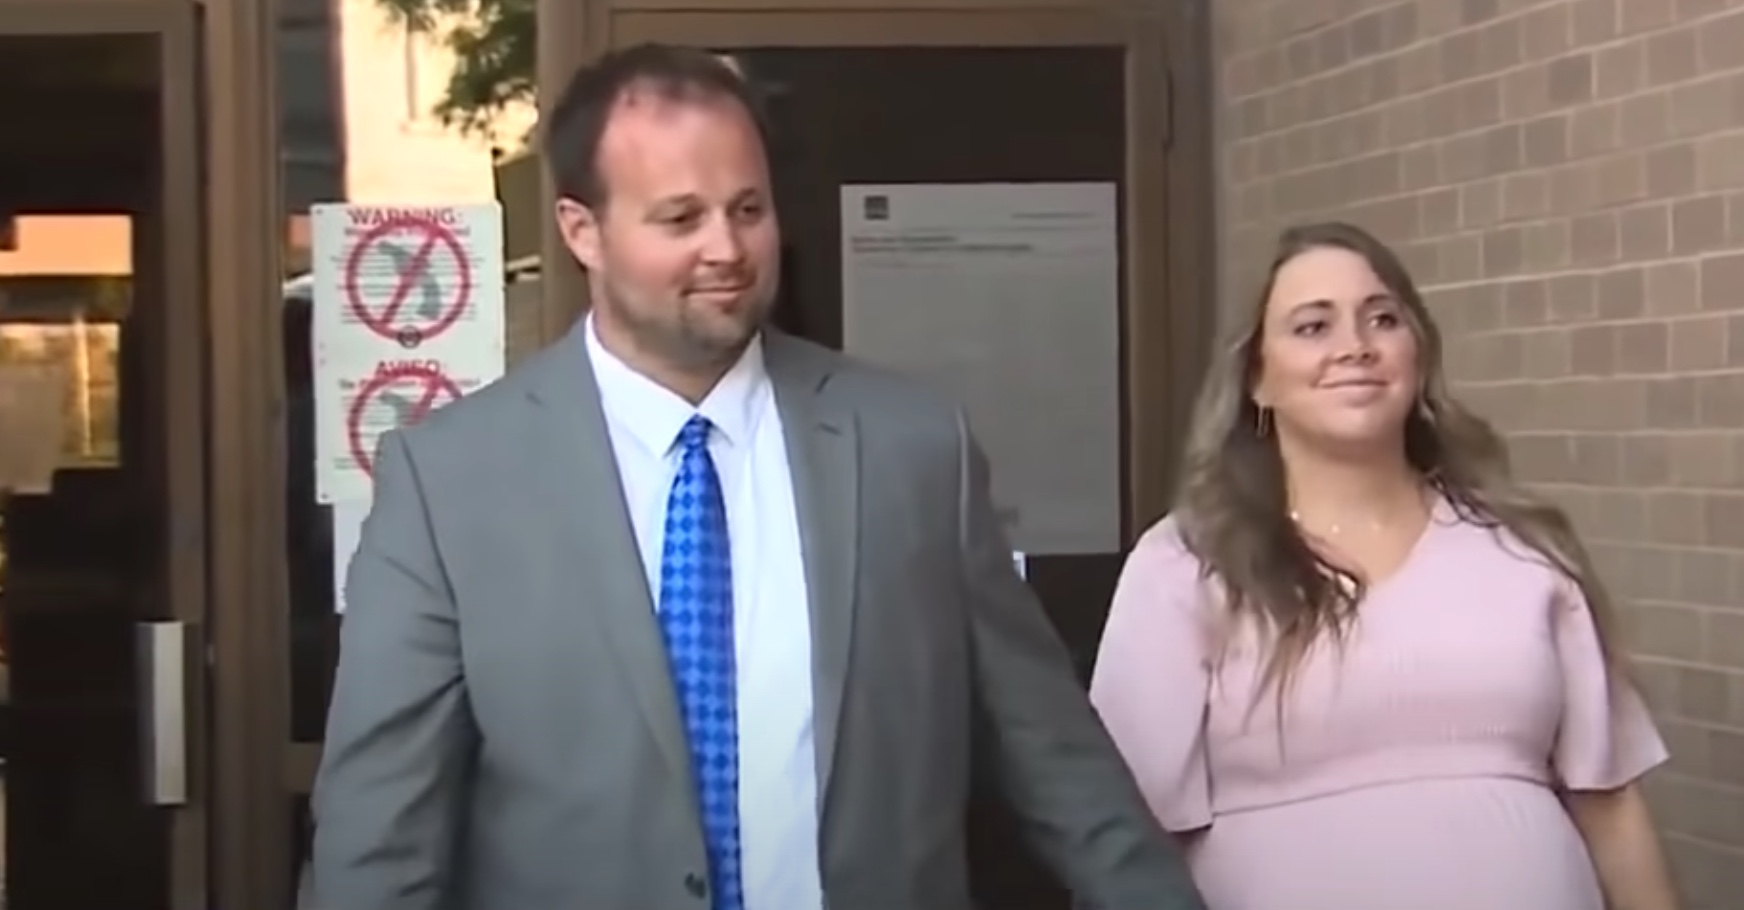 New Information About Josh Duggar's Time in Solitary Confinement Revealed | Nearly one week to the day it was revealed that Josh Duggar had been put into solitary confinement and his release date was pushed nearly two months, new information is coming to light.